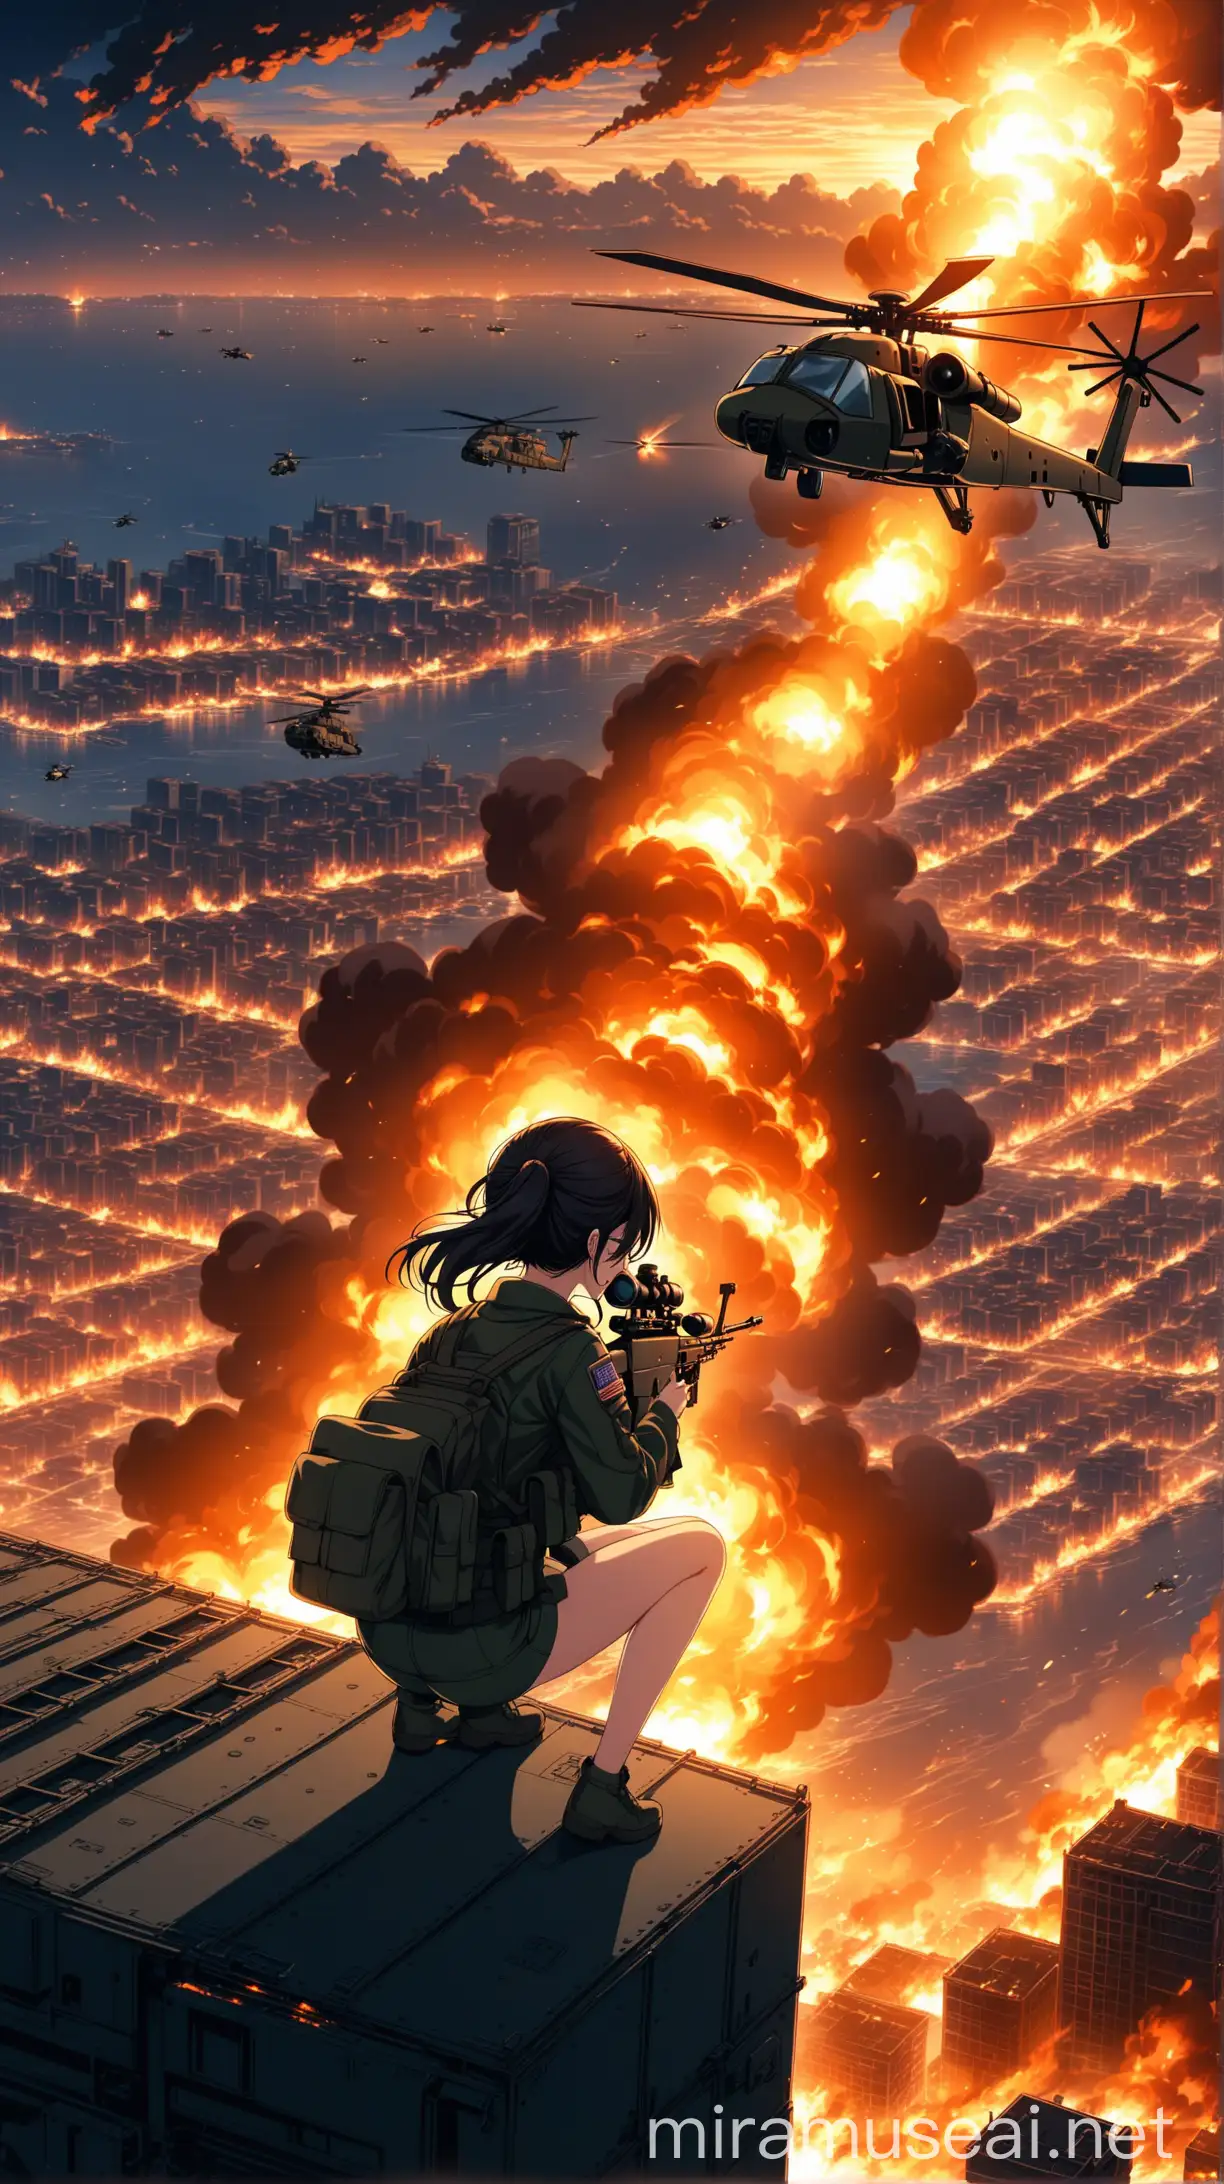 An anime girl with a sniper, flying on a military chopper, and watching a burning city